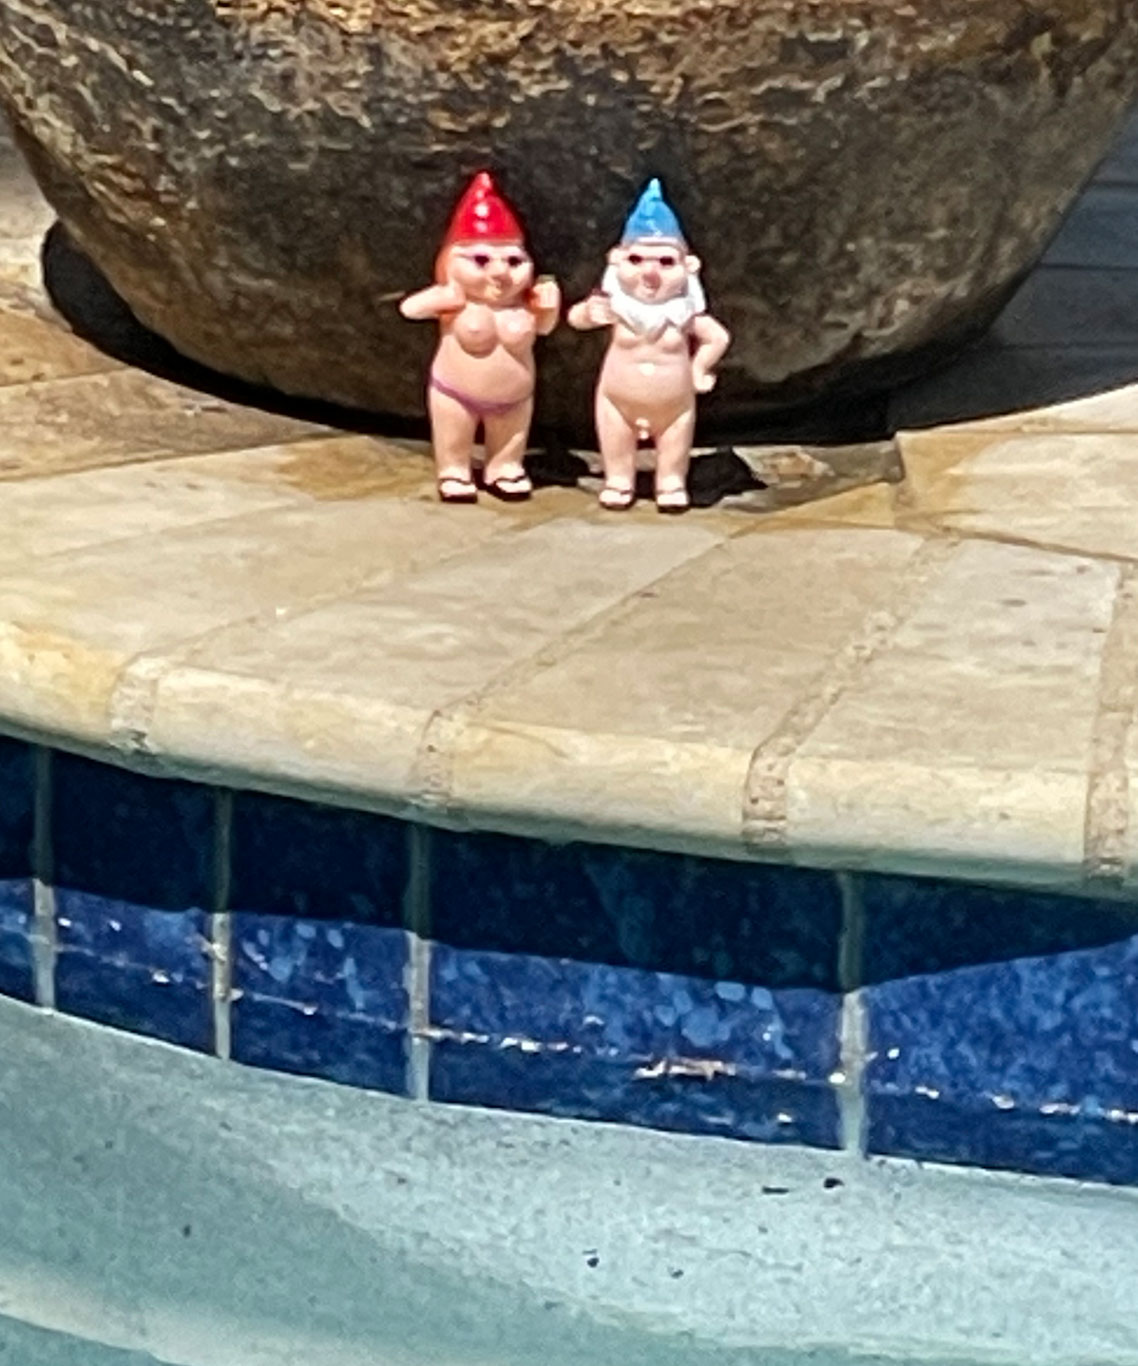 A couple nudist Gnomes getting ready to take a dip in the pool